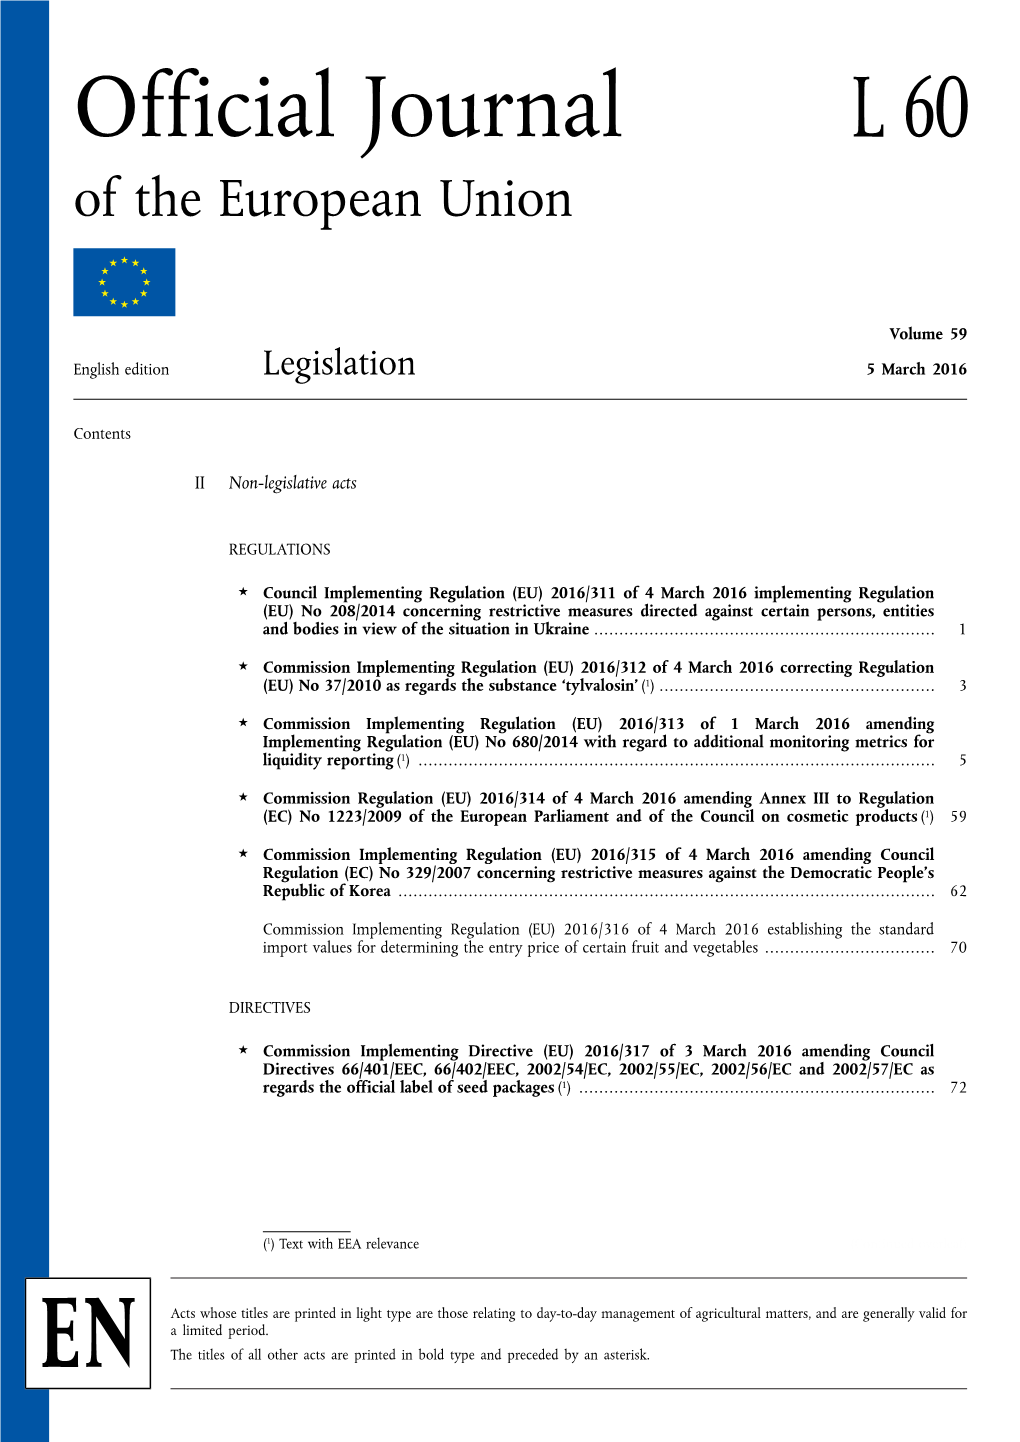 Official Journal L 60 of the European Union